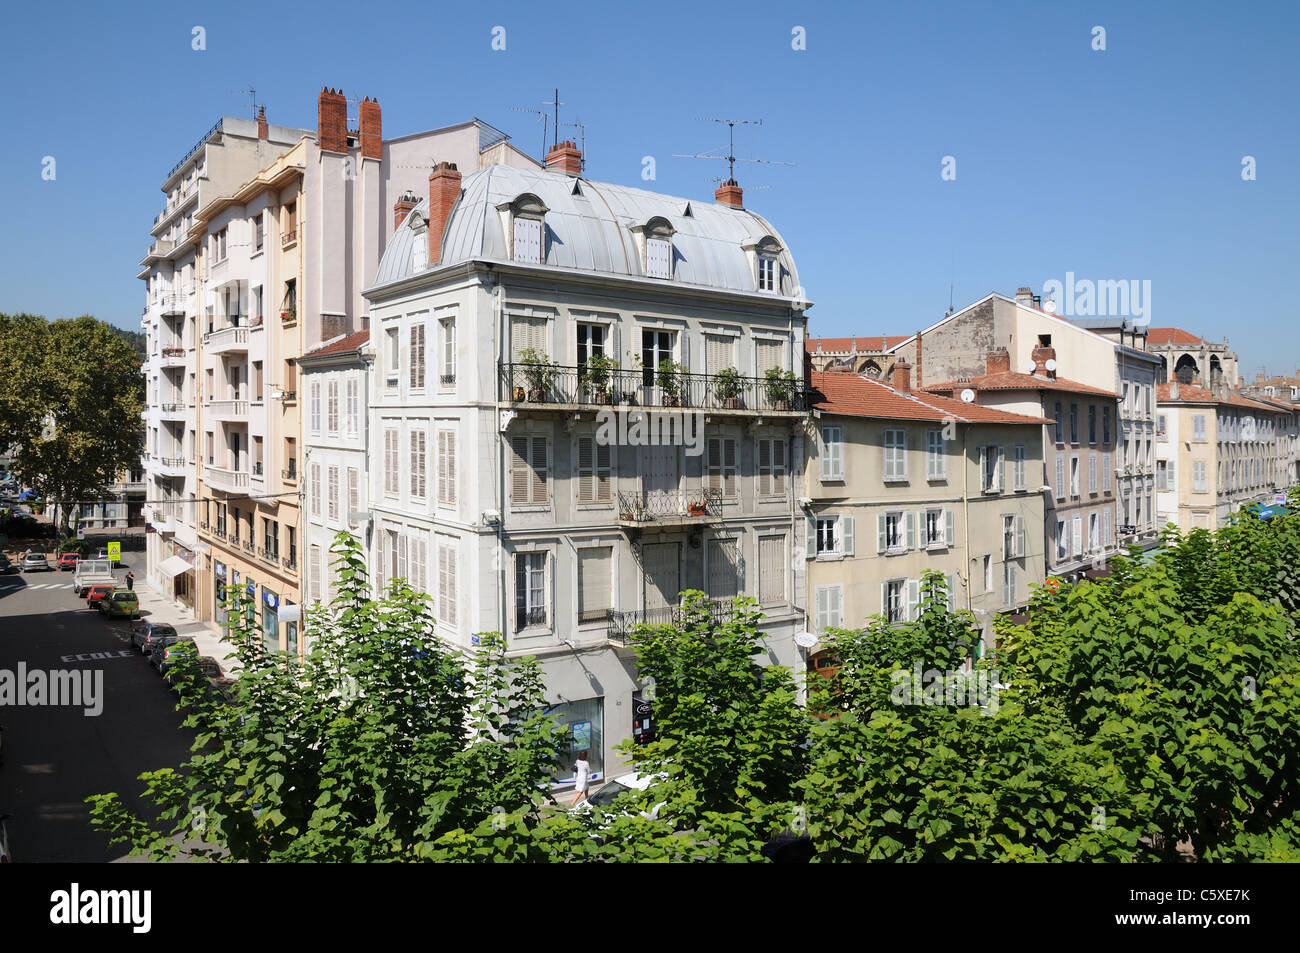 Typical French architecture in Vienne France Stock Photo